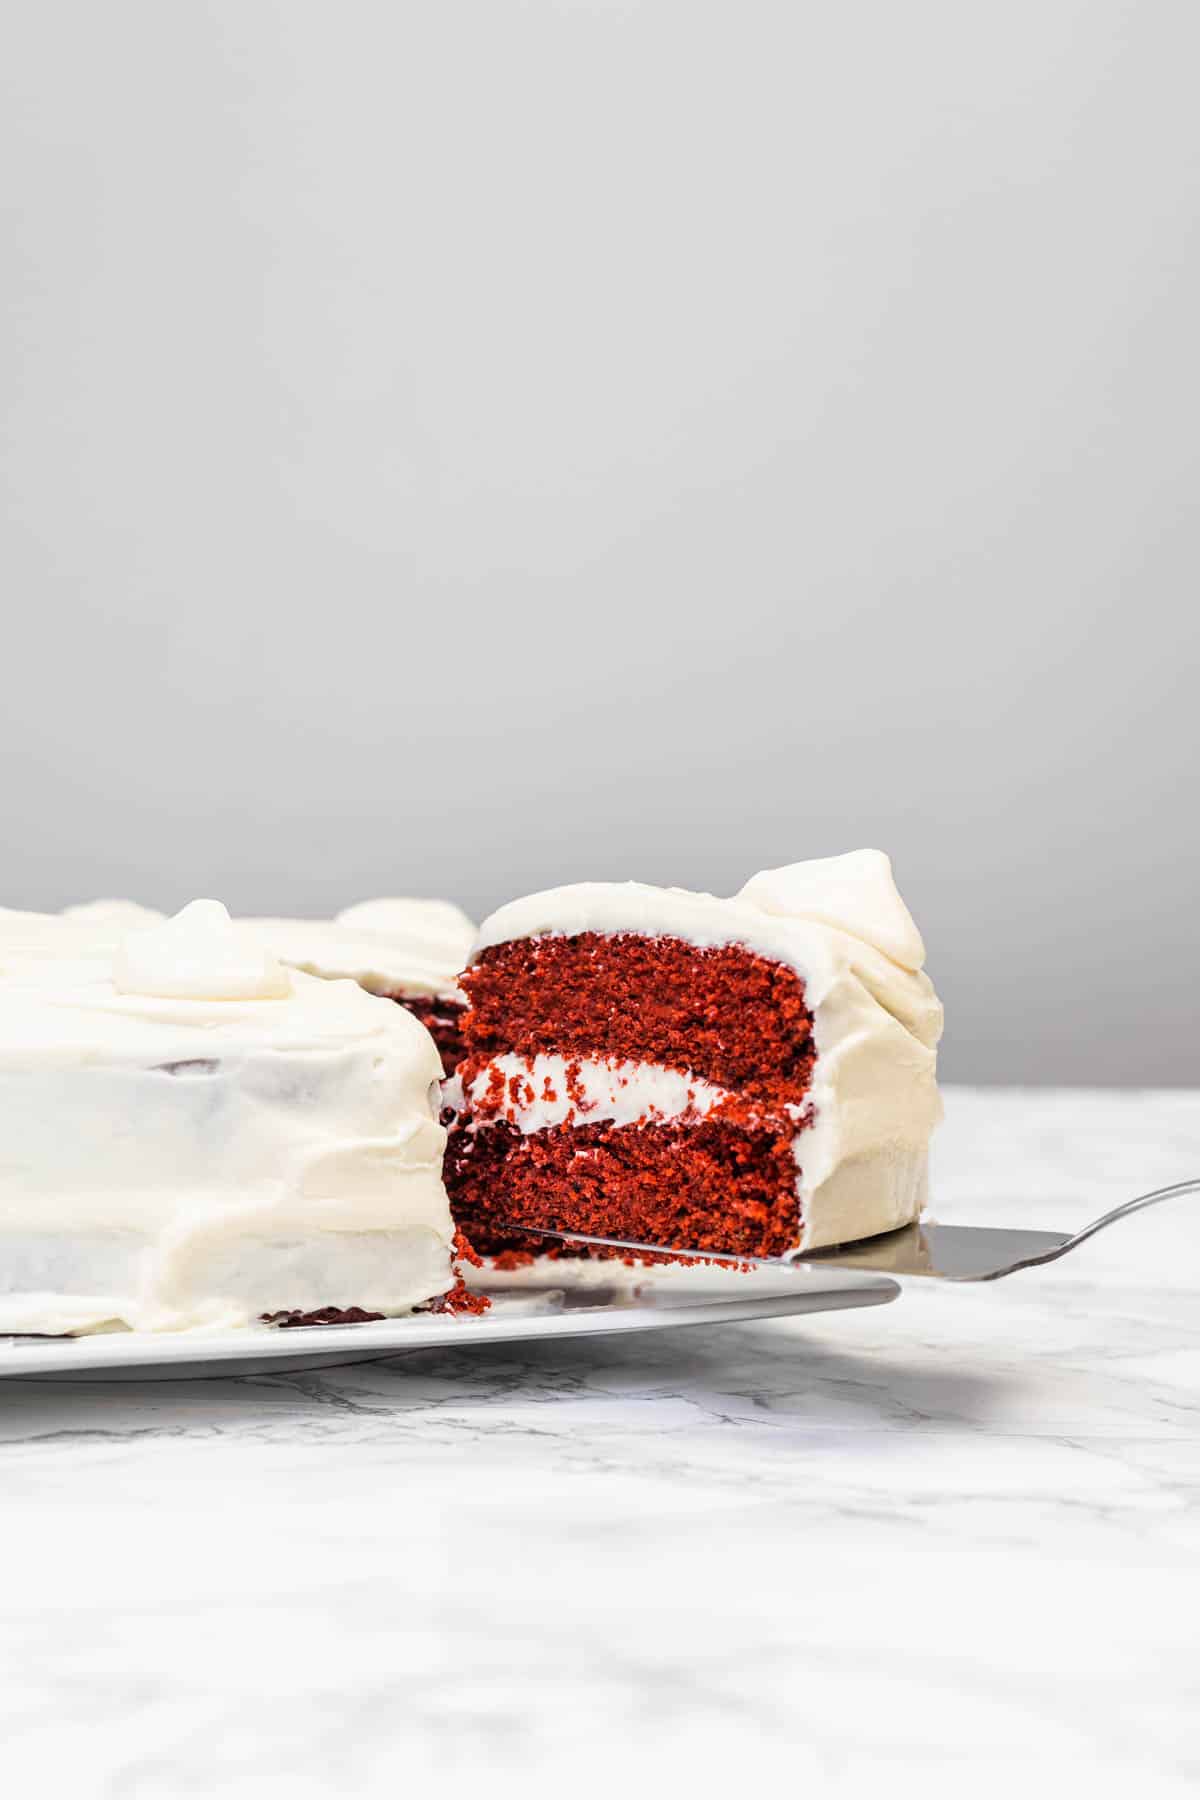 Slice of red velvet cake being lifted out of cake on plate with a cake server